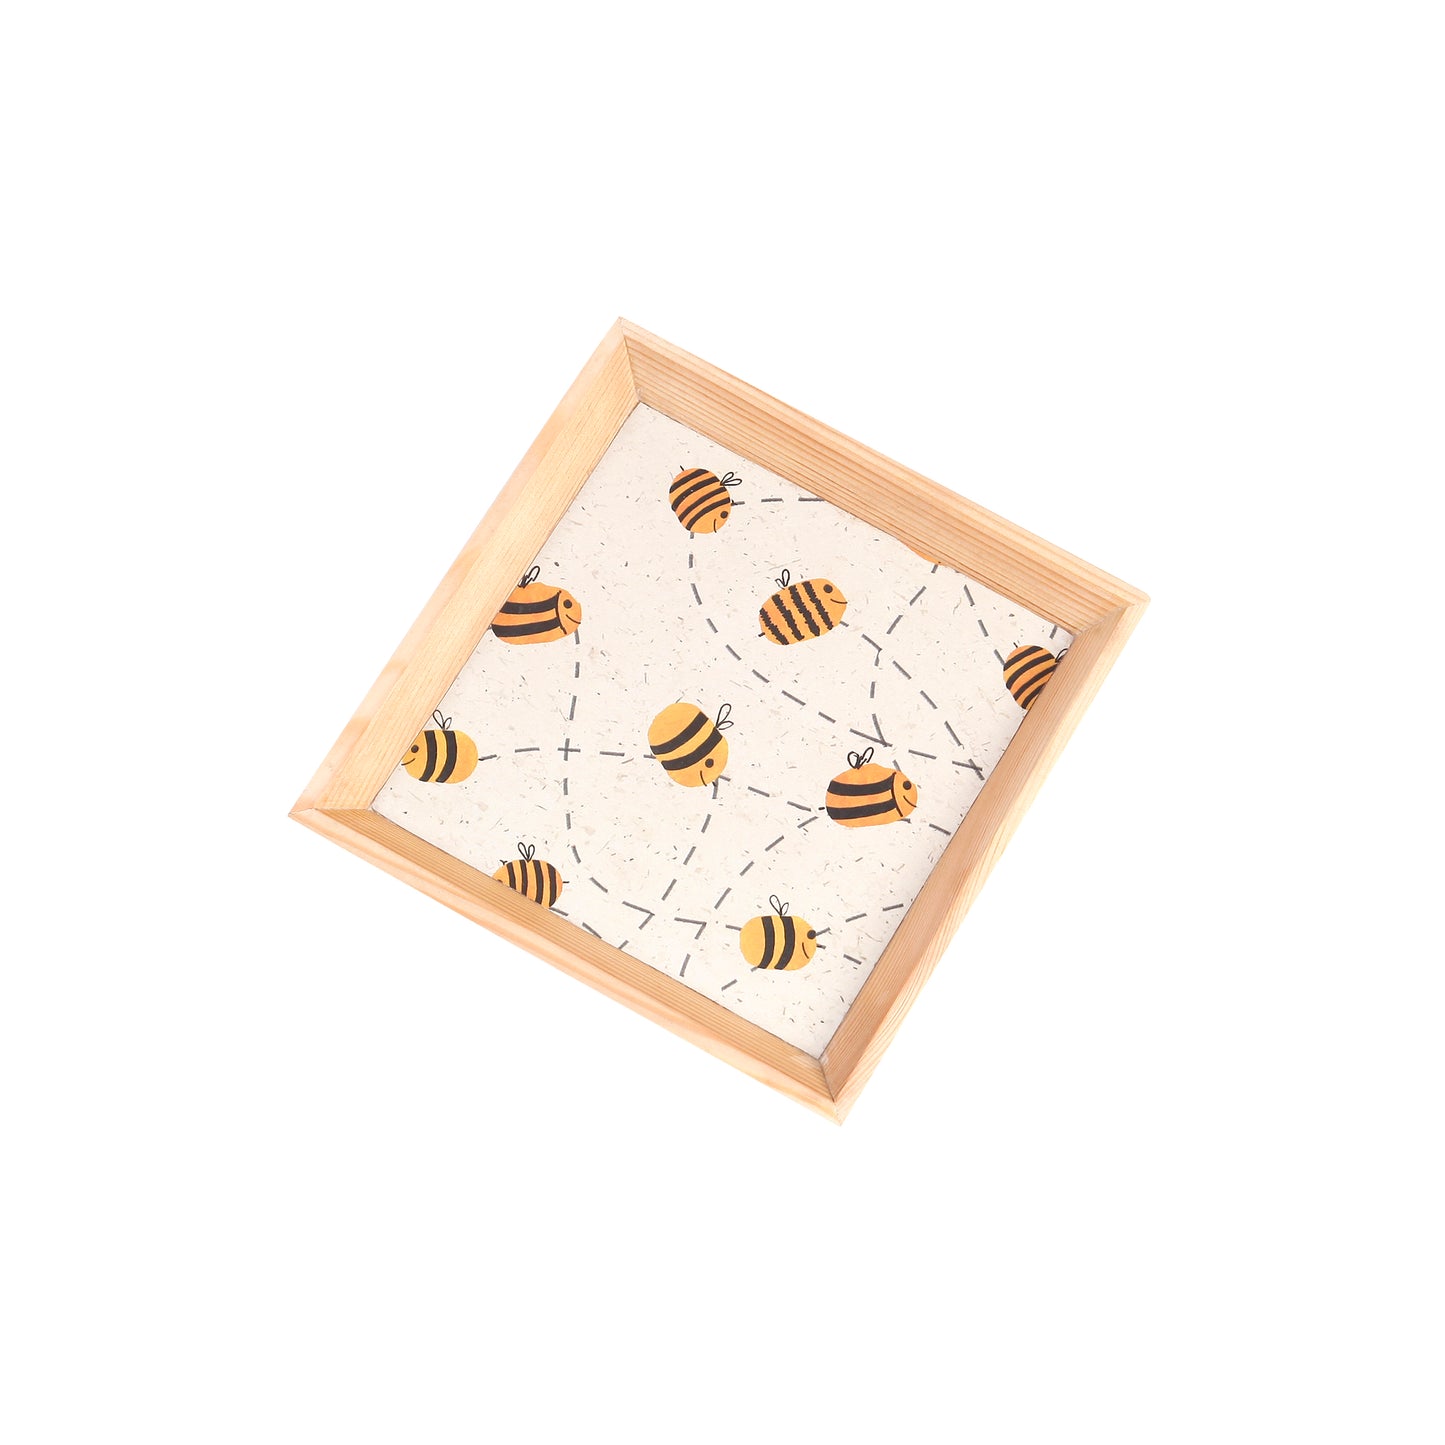 A Tiny Mistake Buzybee Small Square Wooden Serving Tray, 18 x 18 x 2 cm